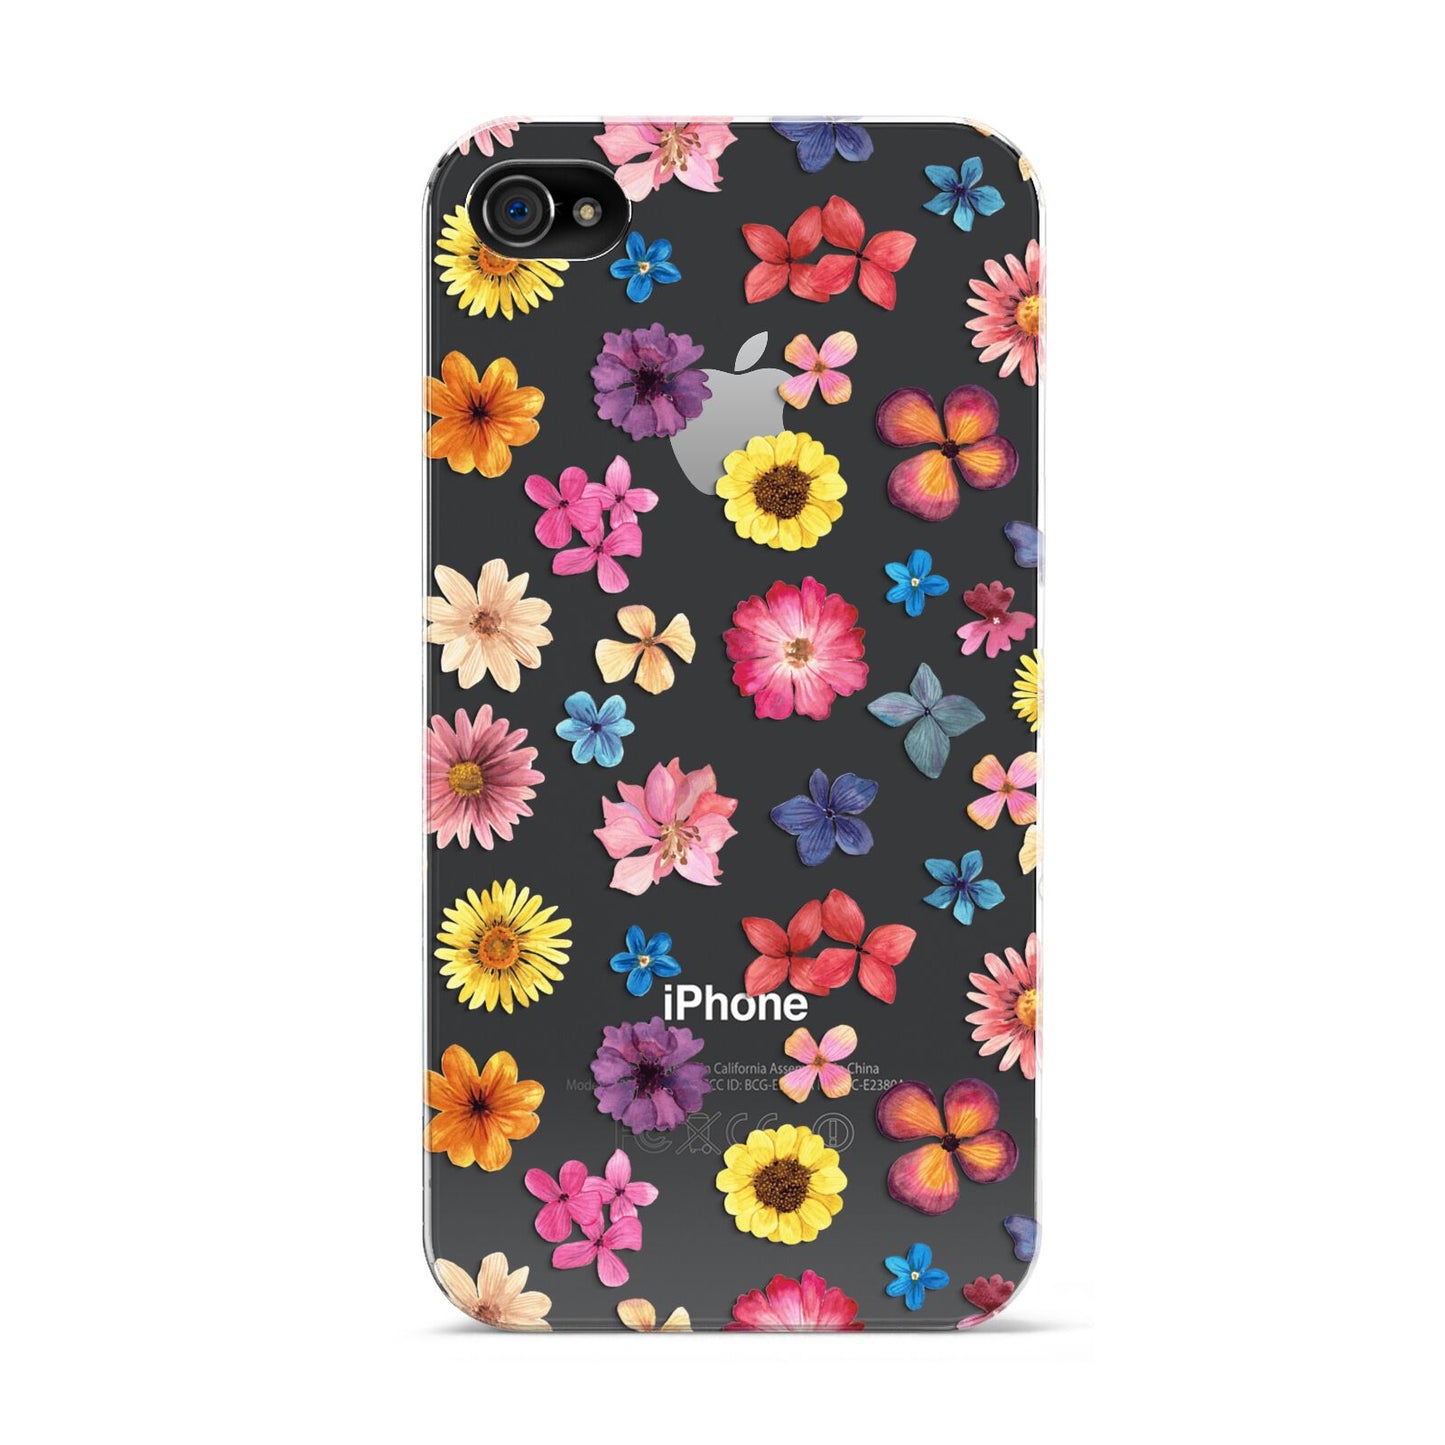 Summer Floral Apple iPhone 4s Case